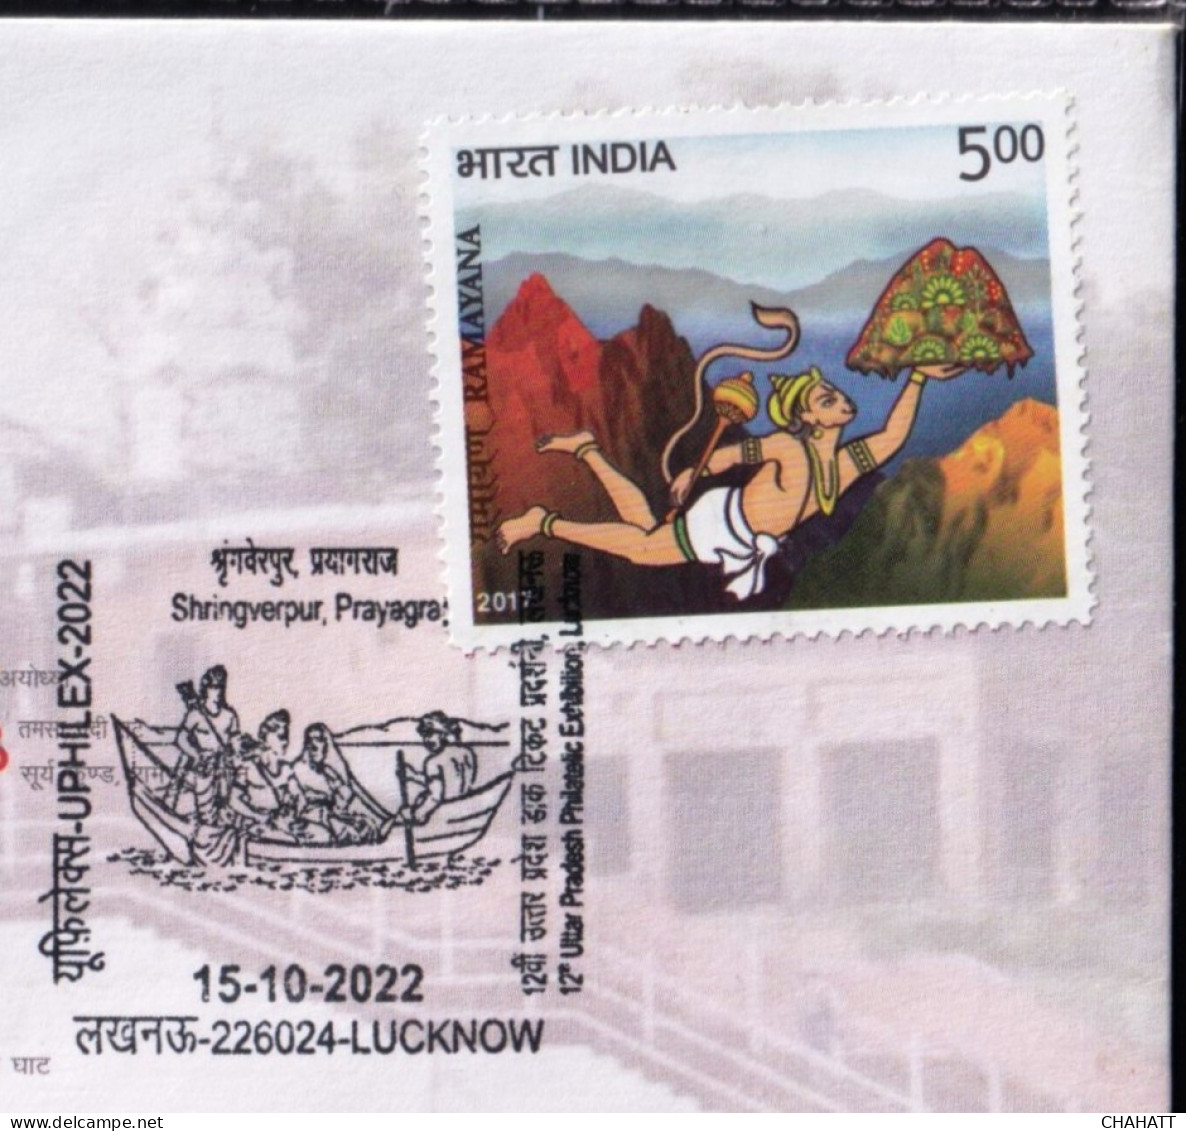 HINDUISM - RAMAYAN- SRINGESWAR- RIVER CROSSING BY BOAT - PICTORIAL CANCELLATION - SPECIAL COVER - INDIA -2022- BX4-23 - Hindouisme